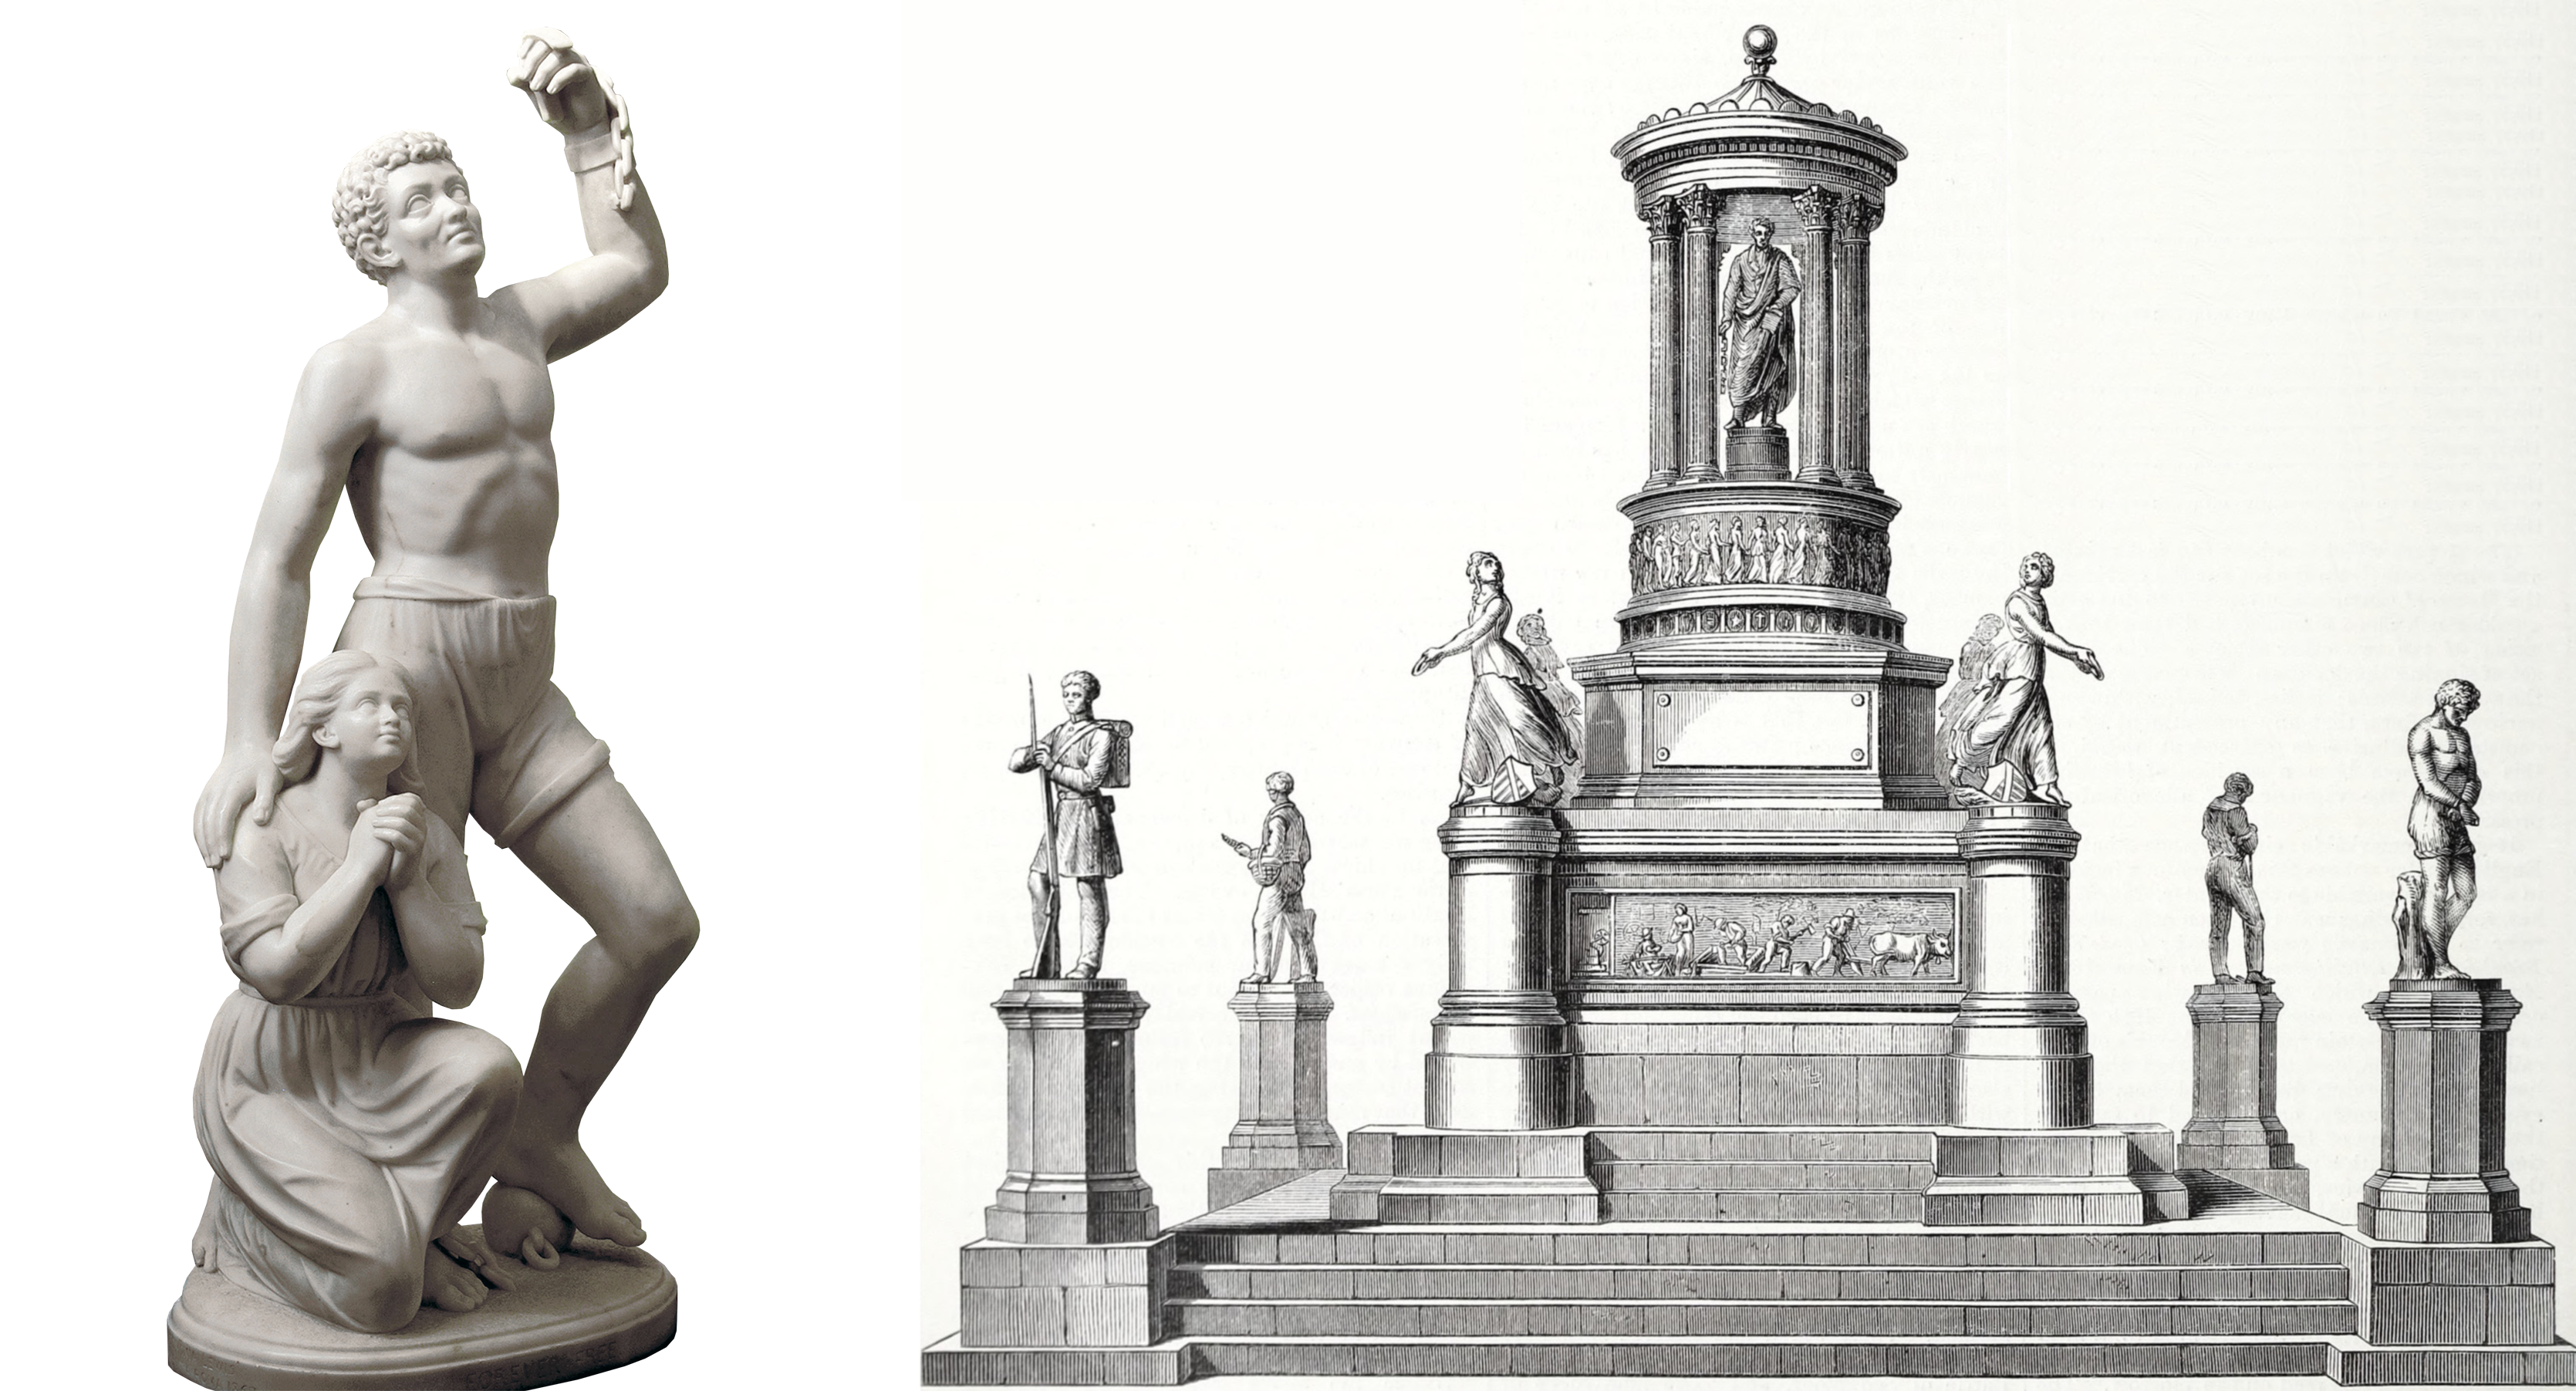 Left: Edmonia Lewis, Forever Free, 1867, marble, 106 cm high (Howard University Gallery of Art; photo: Art History Project); Right: Harriet Hosmer, early design for Freedmen’s Memorial to Lincoln, published in The Art-Journal, (January 1, 1868), London: Virtue & Co., p. 8.